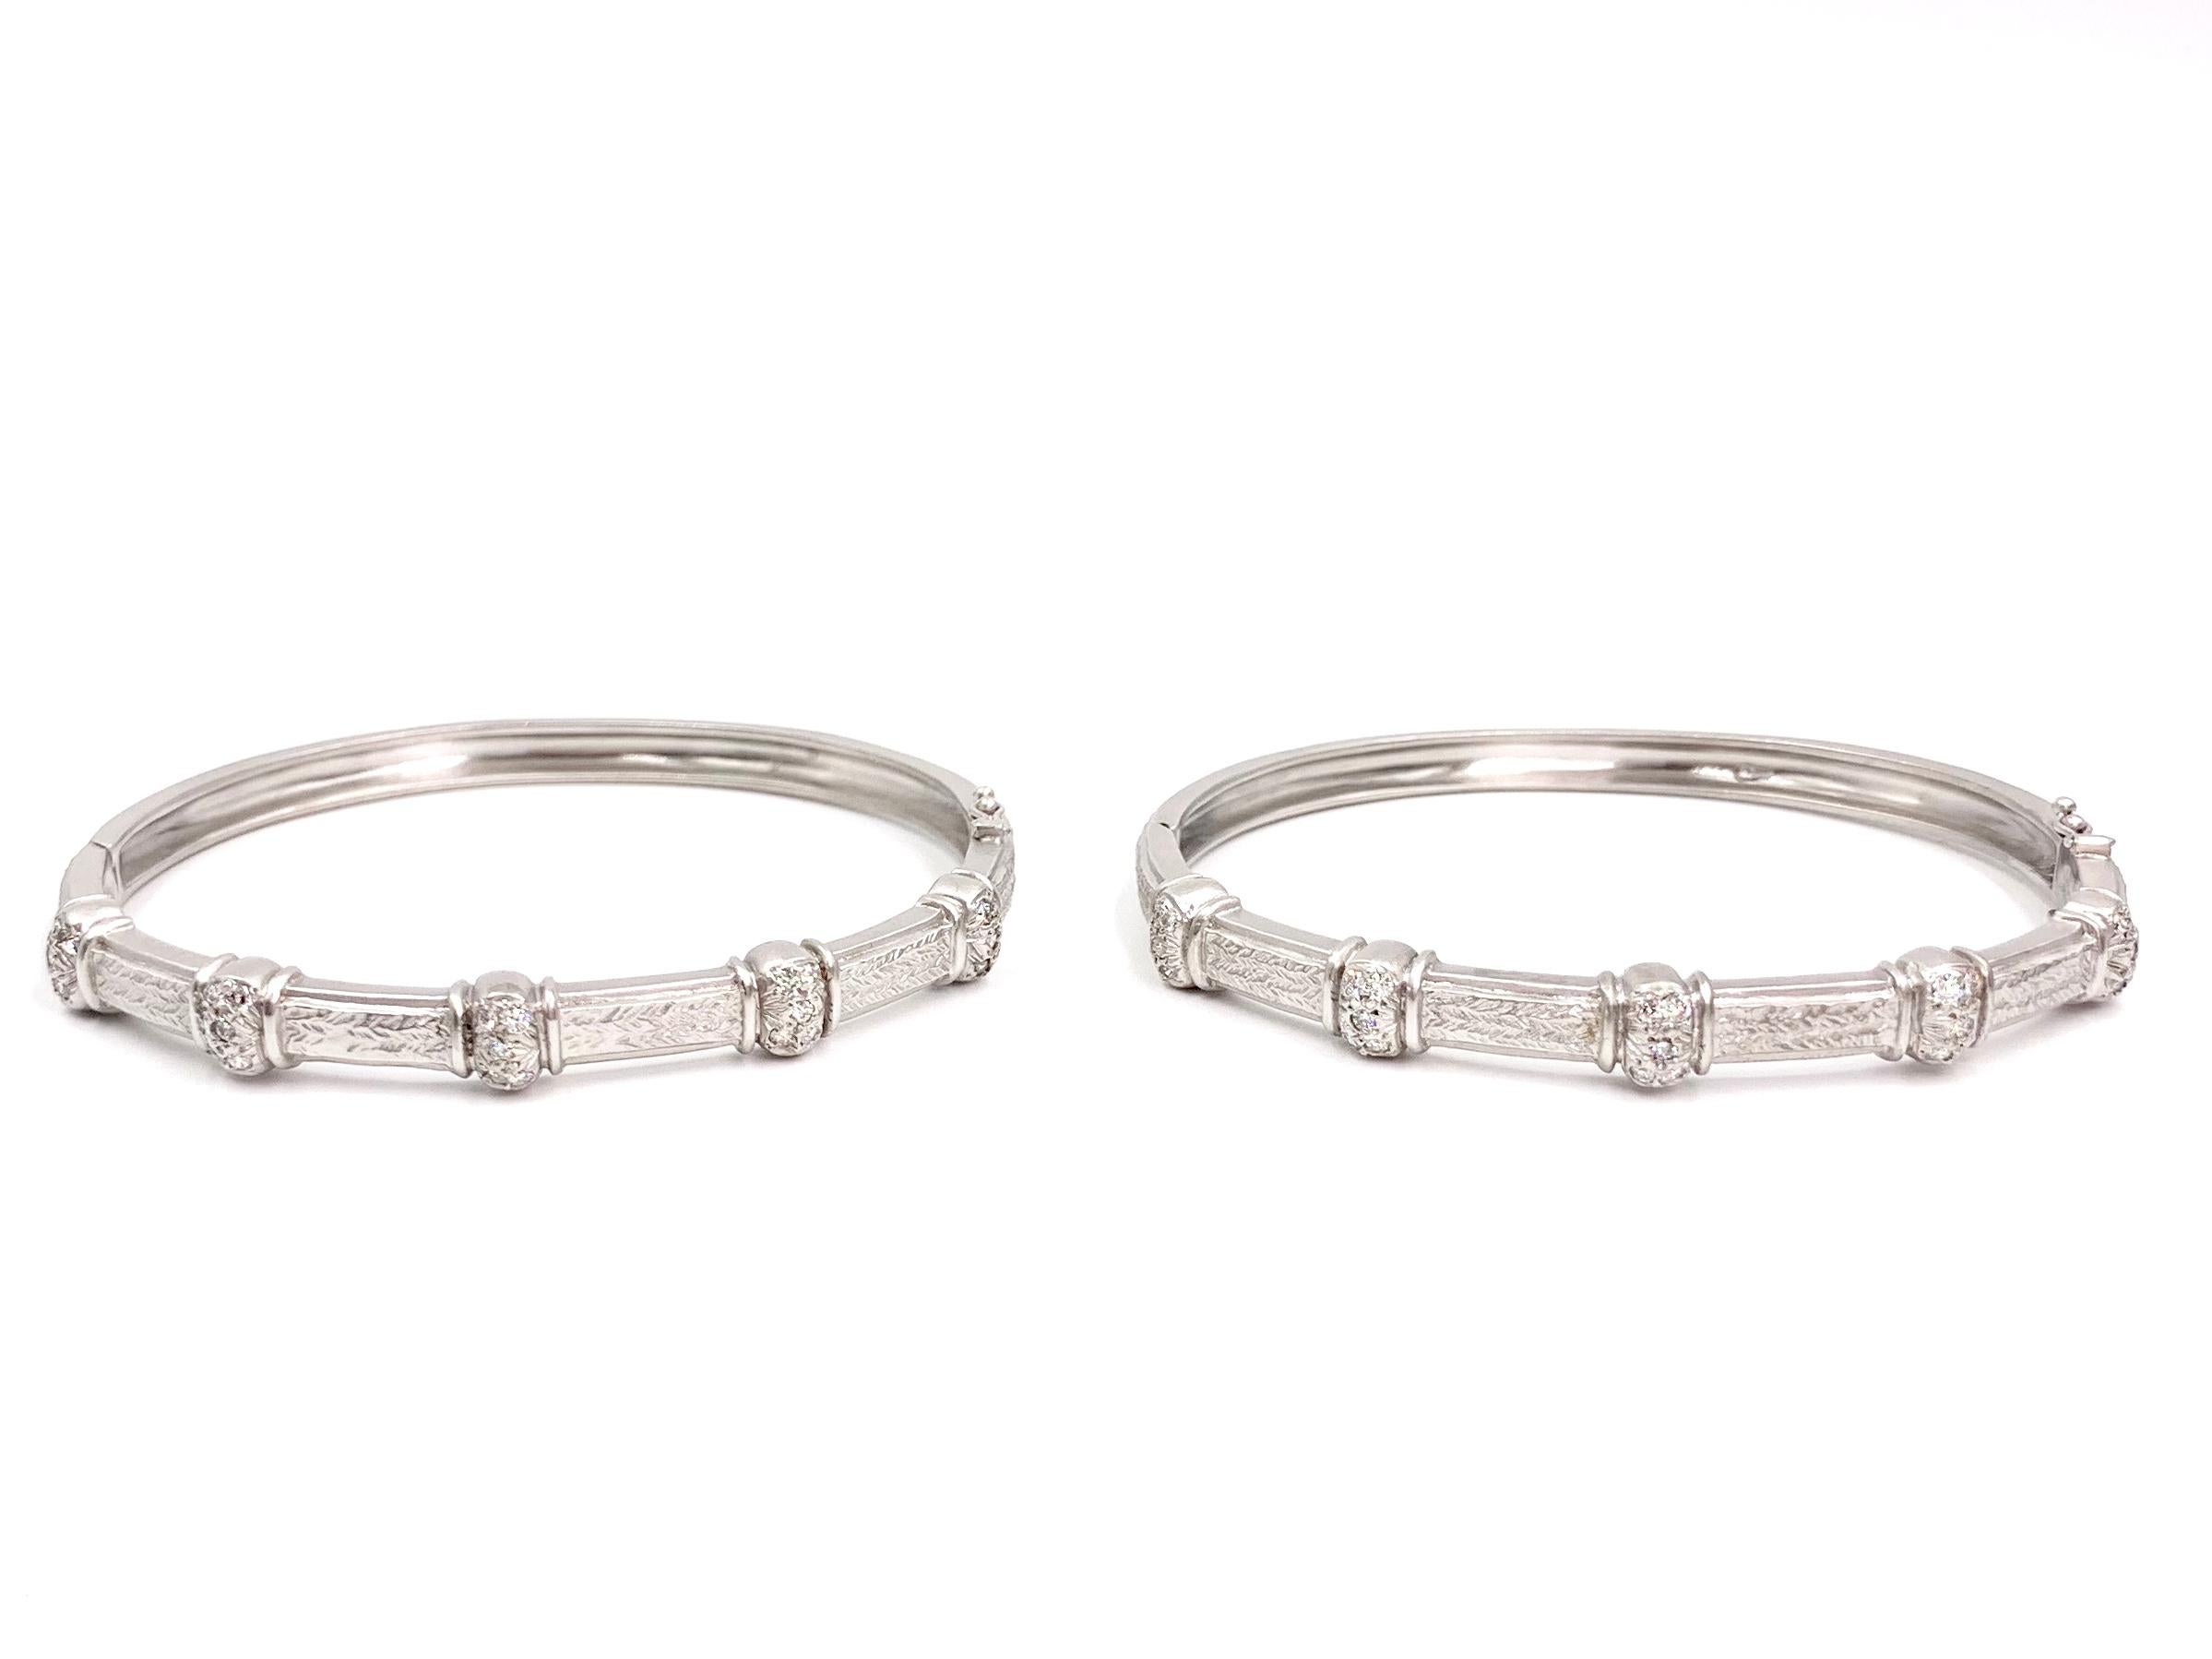 Set of two 18 karat white gold and diamond stacking bangle bracelets from the 